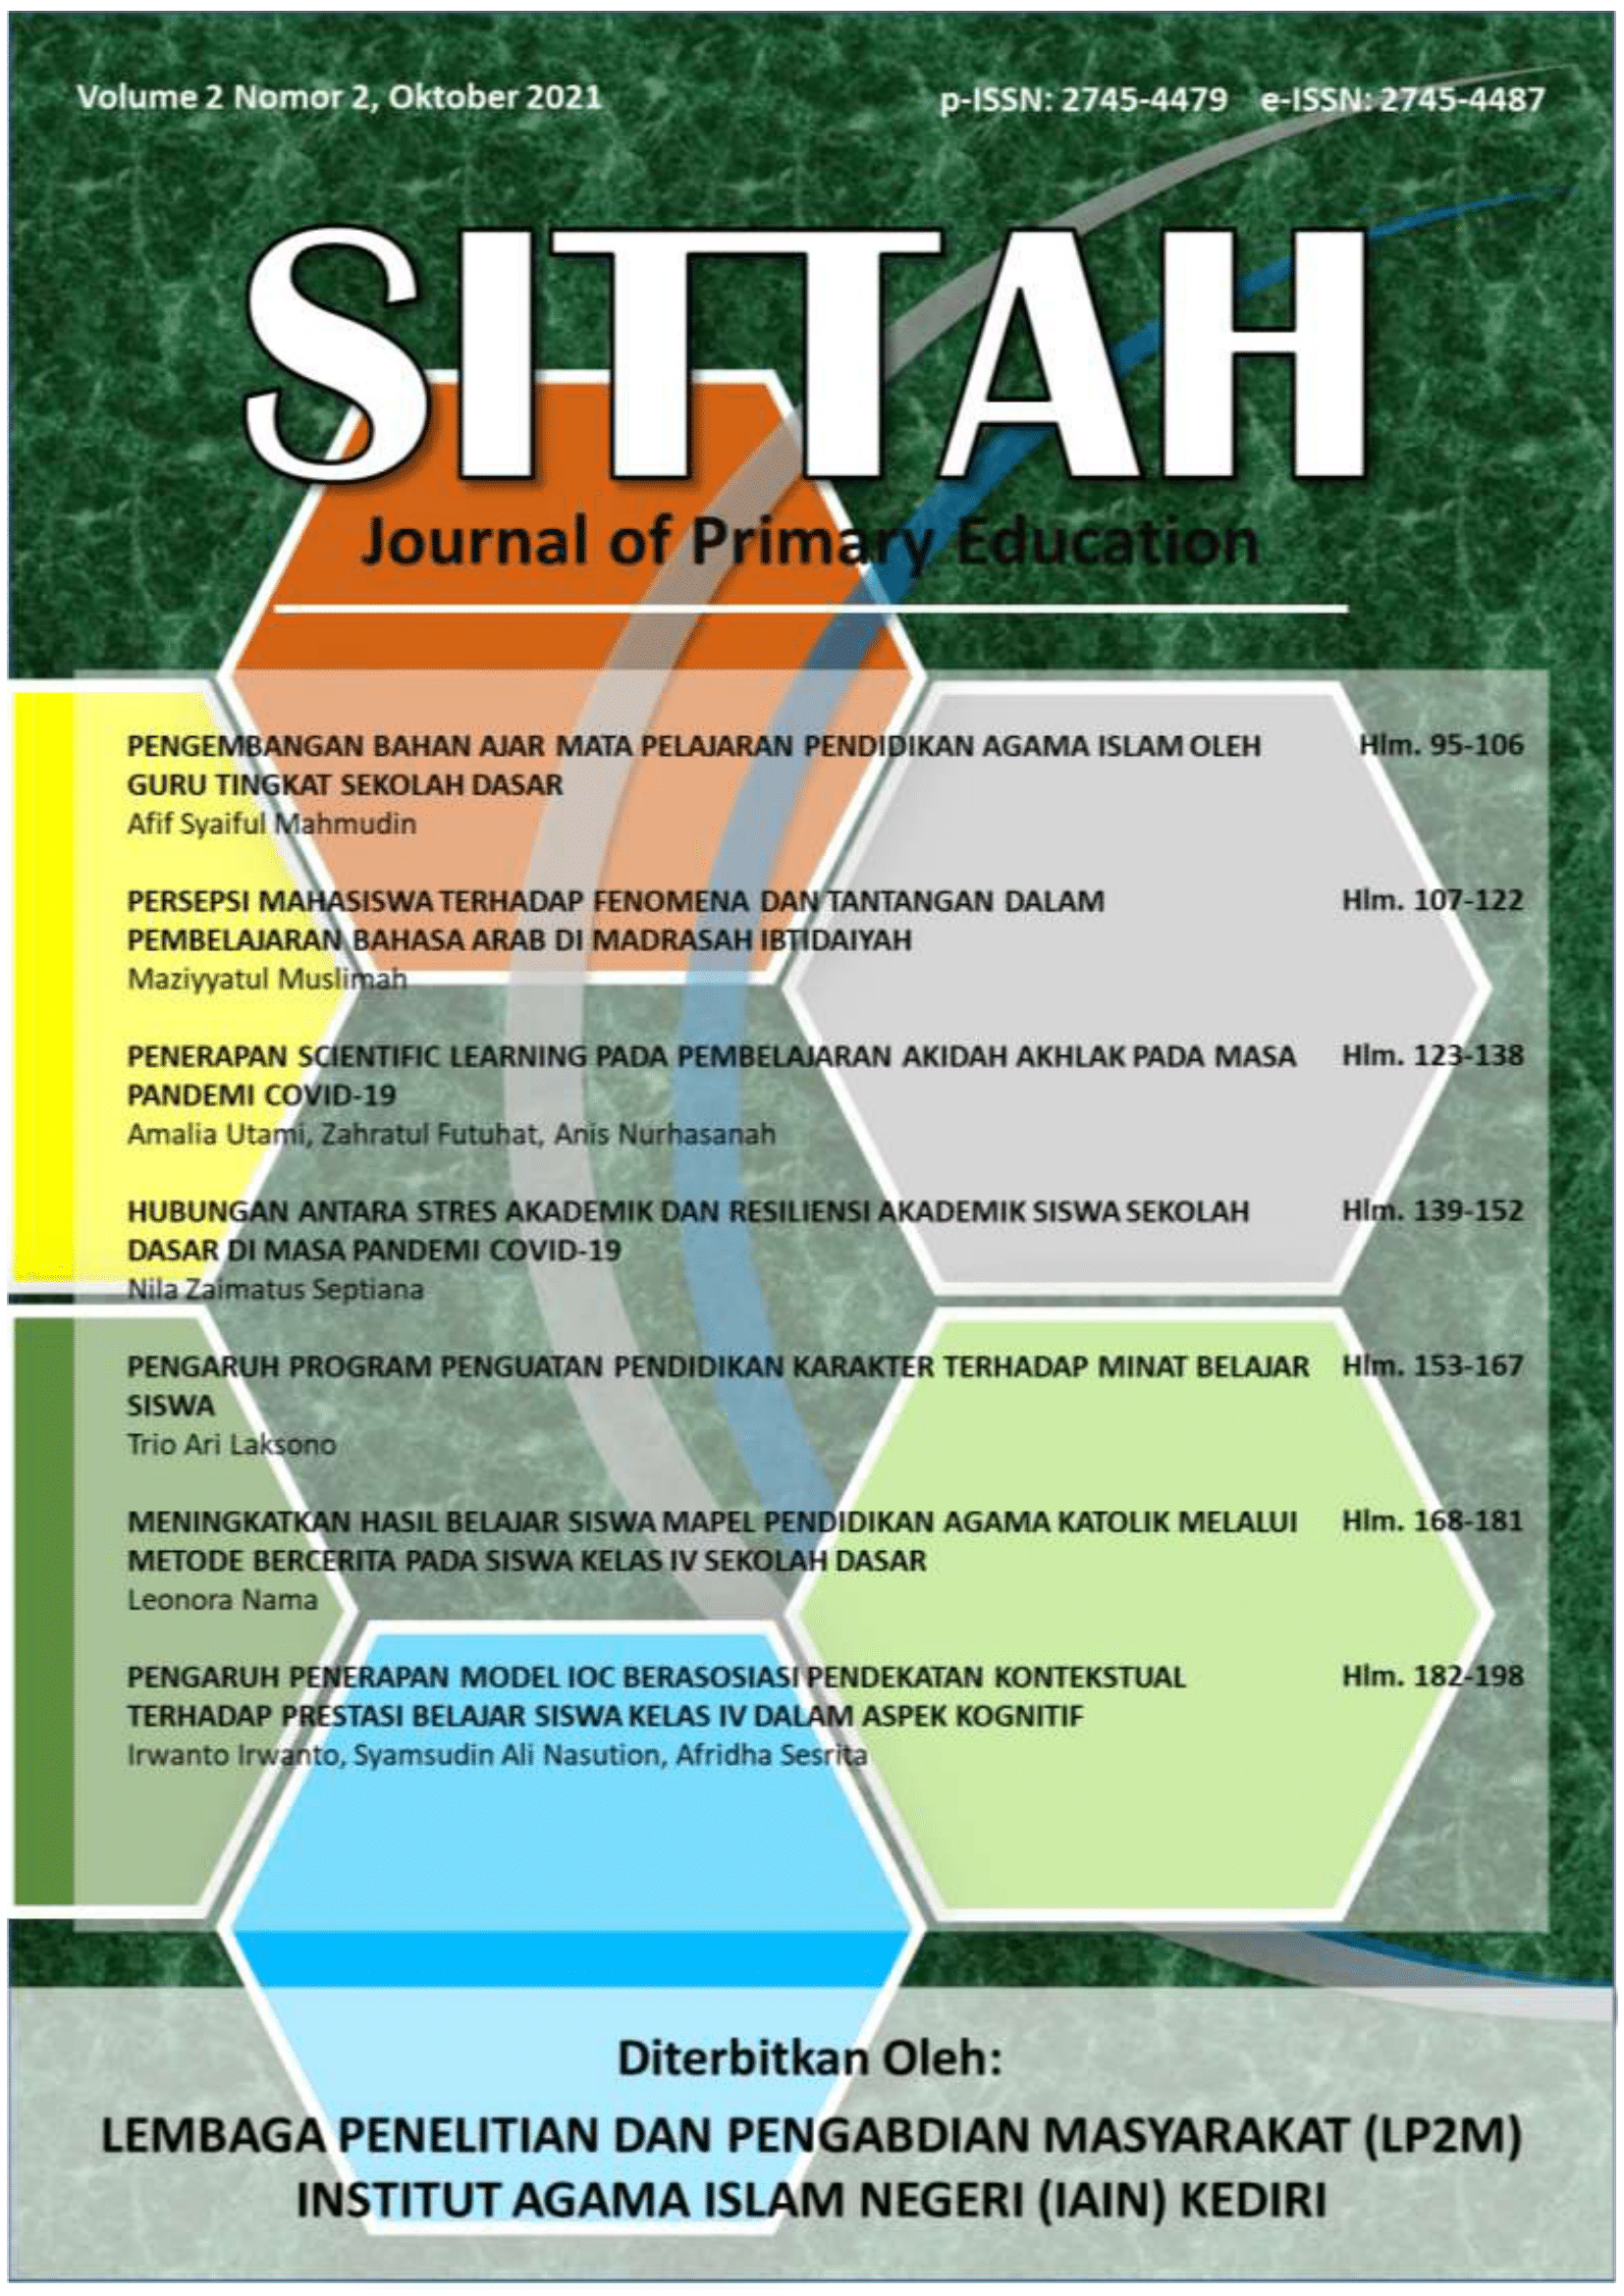 					View Vol. 2 No. 2 (2021): SITTAH: Journal of Primary Education
				